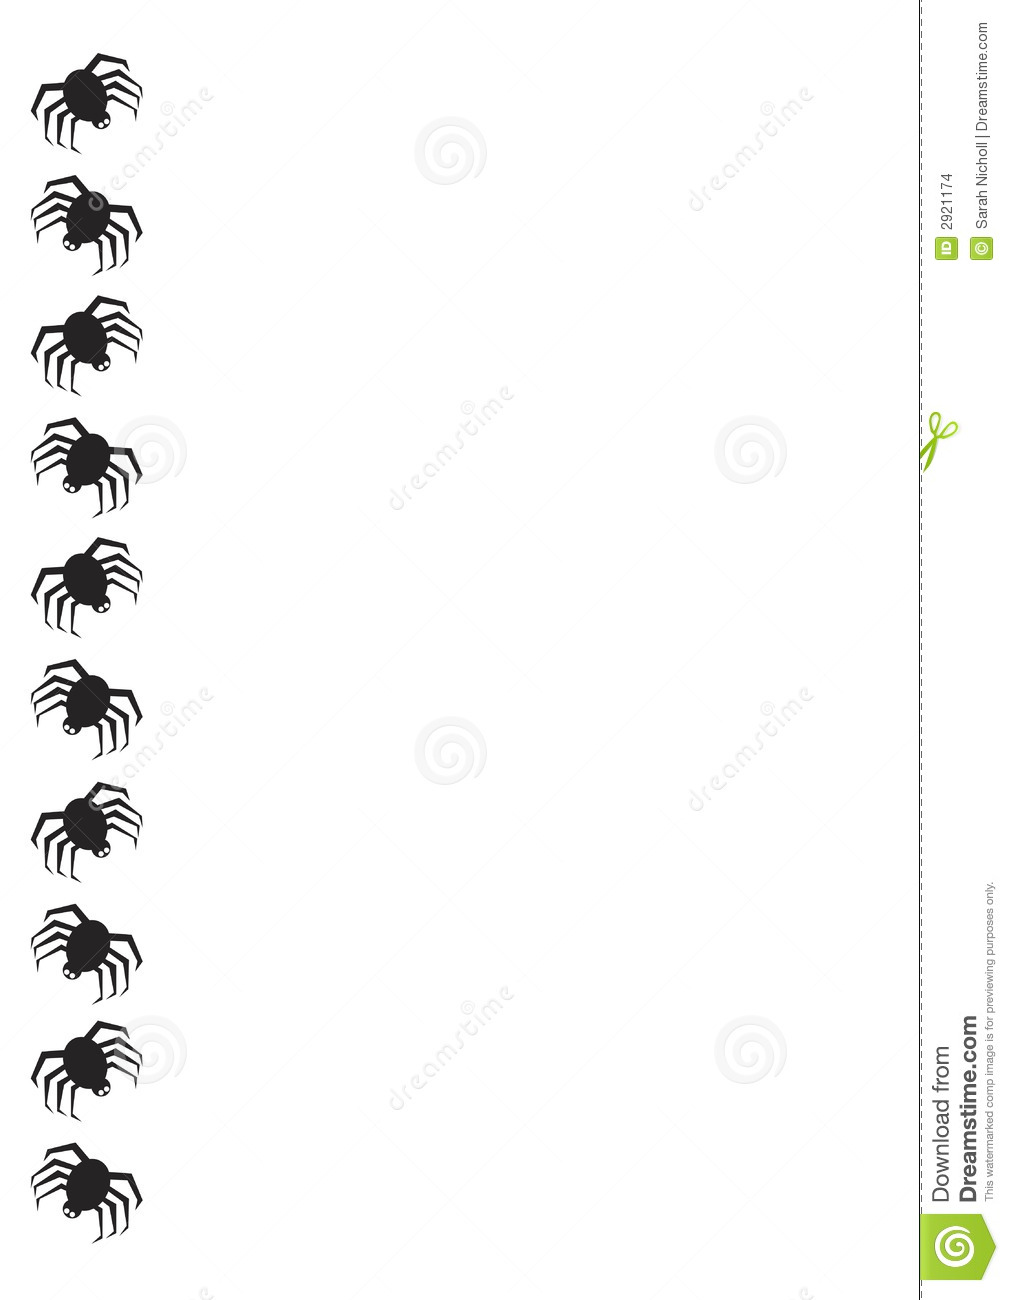 Free Halloween Clip Art Borders Youth Party Hat Border Royalty Free